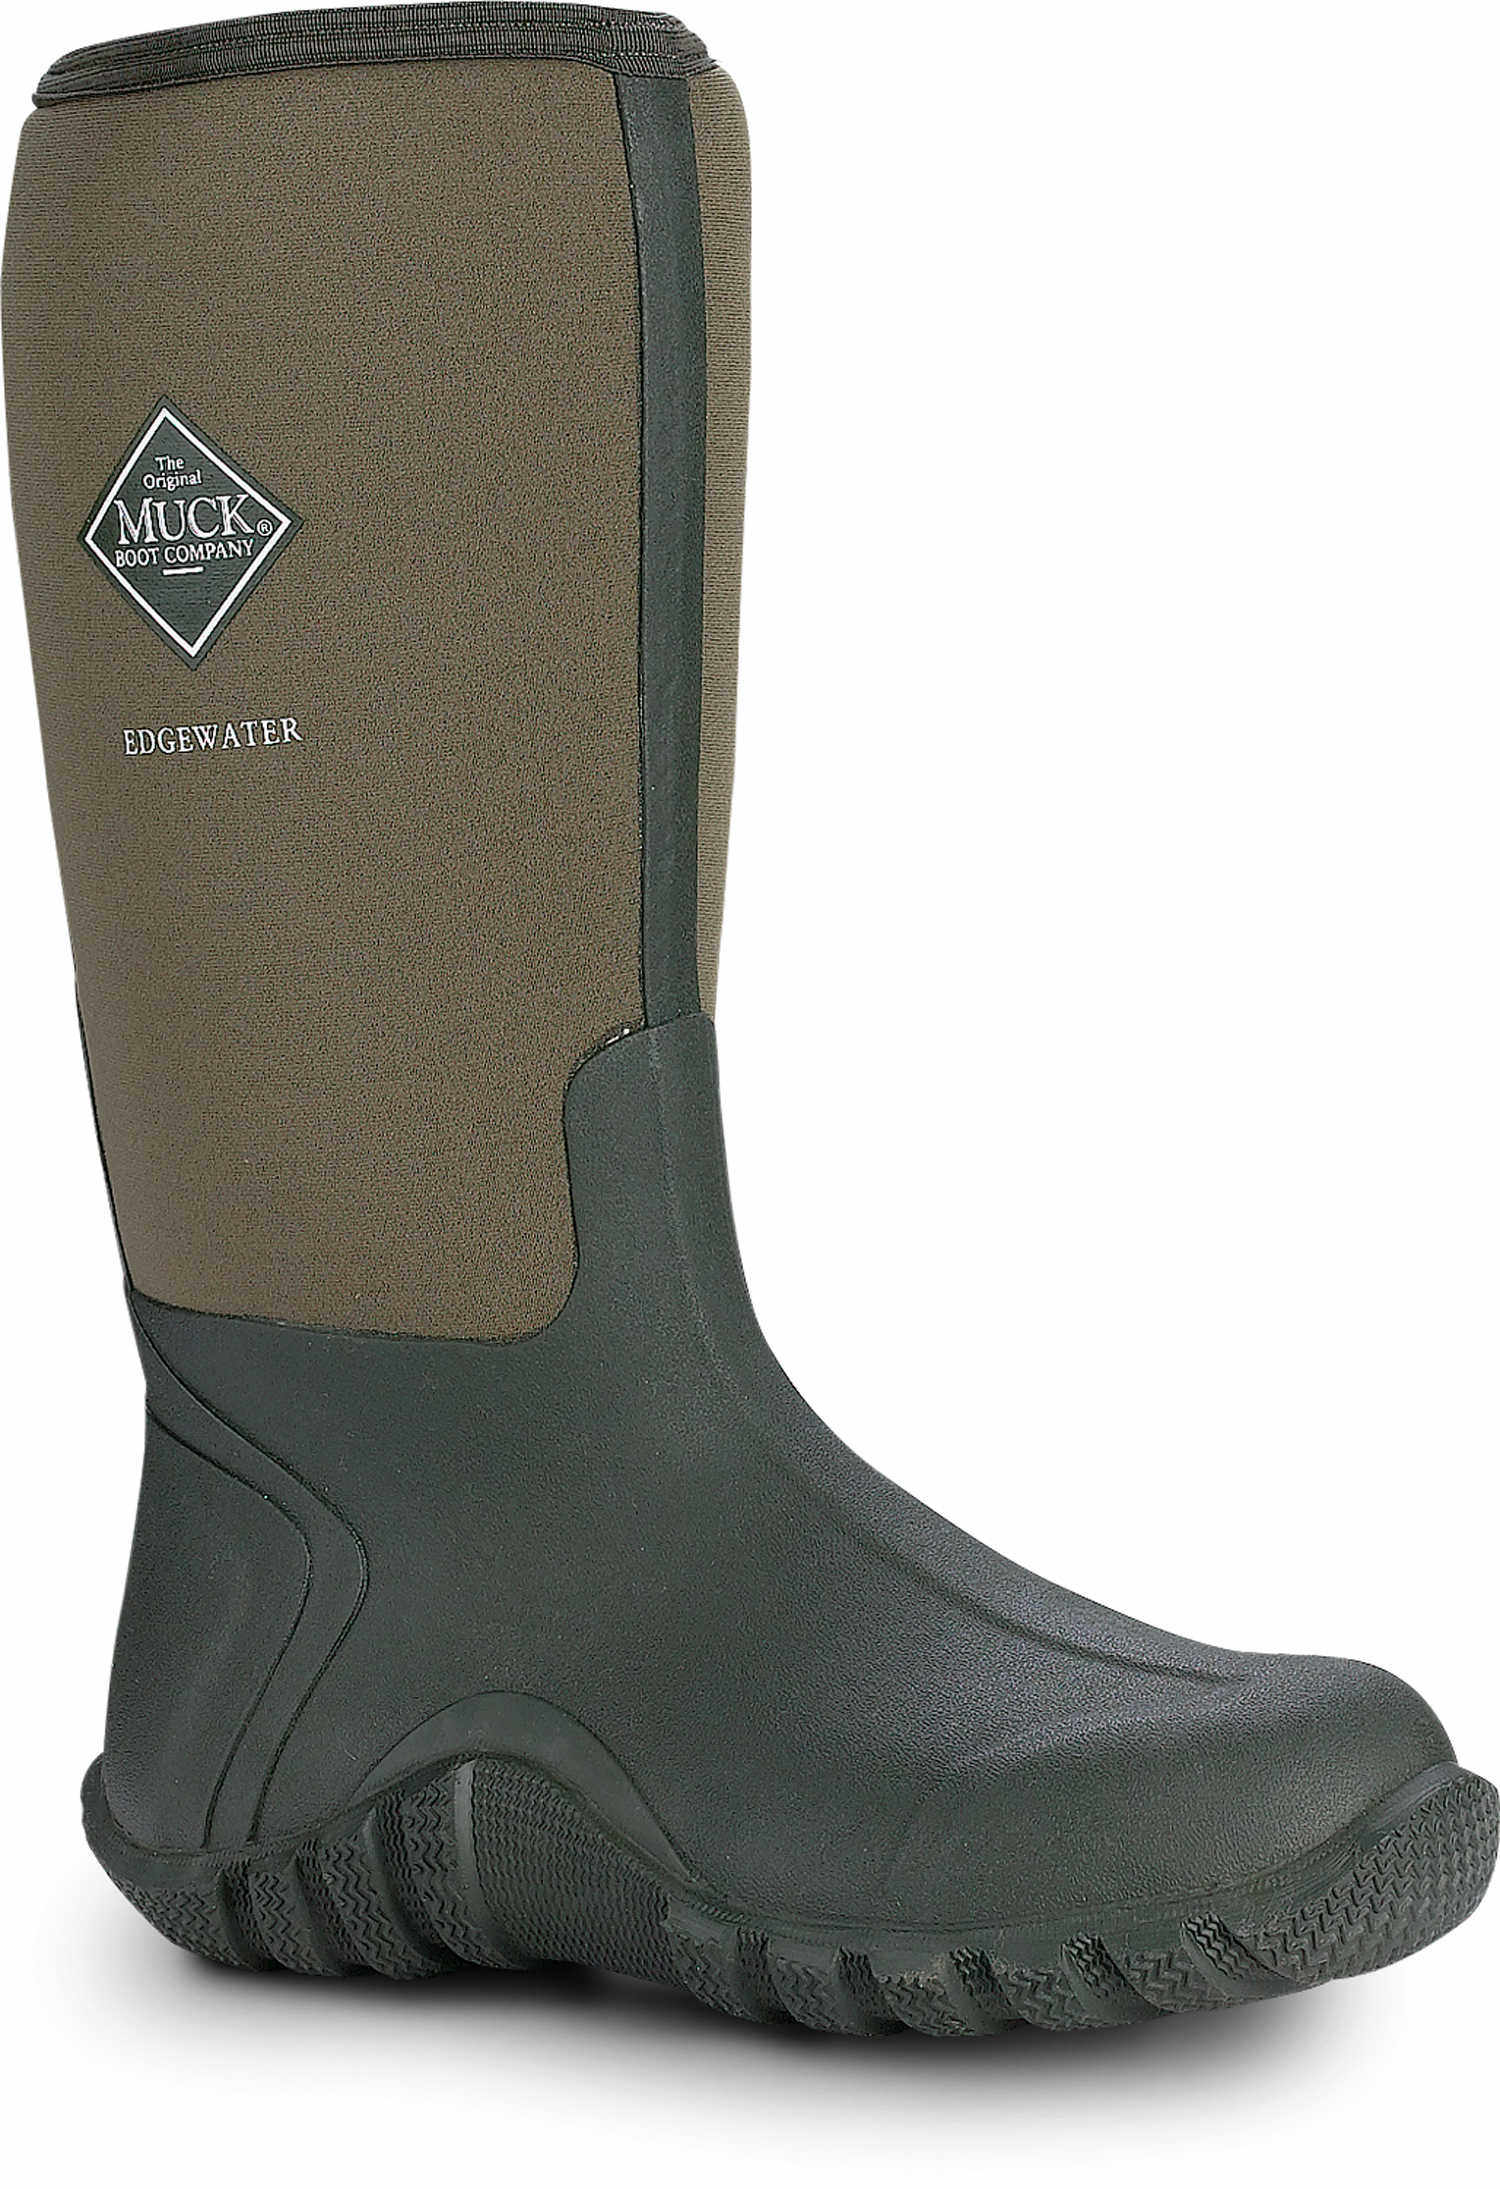 Muck Boot Edgewater Field... | Forestry Suppliers, Inc.